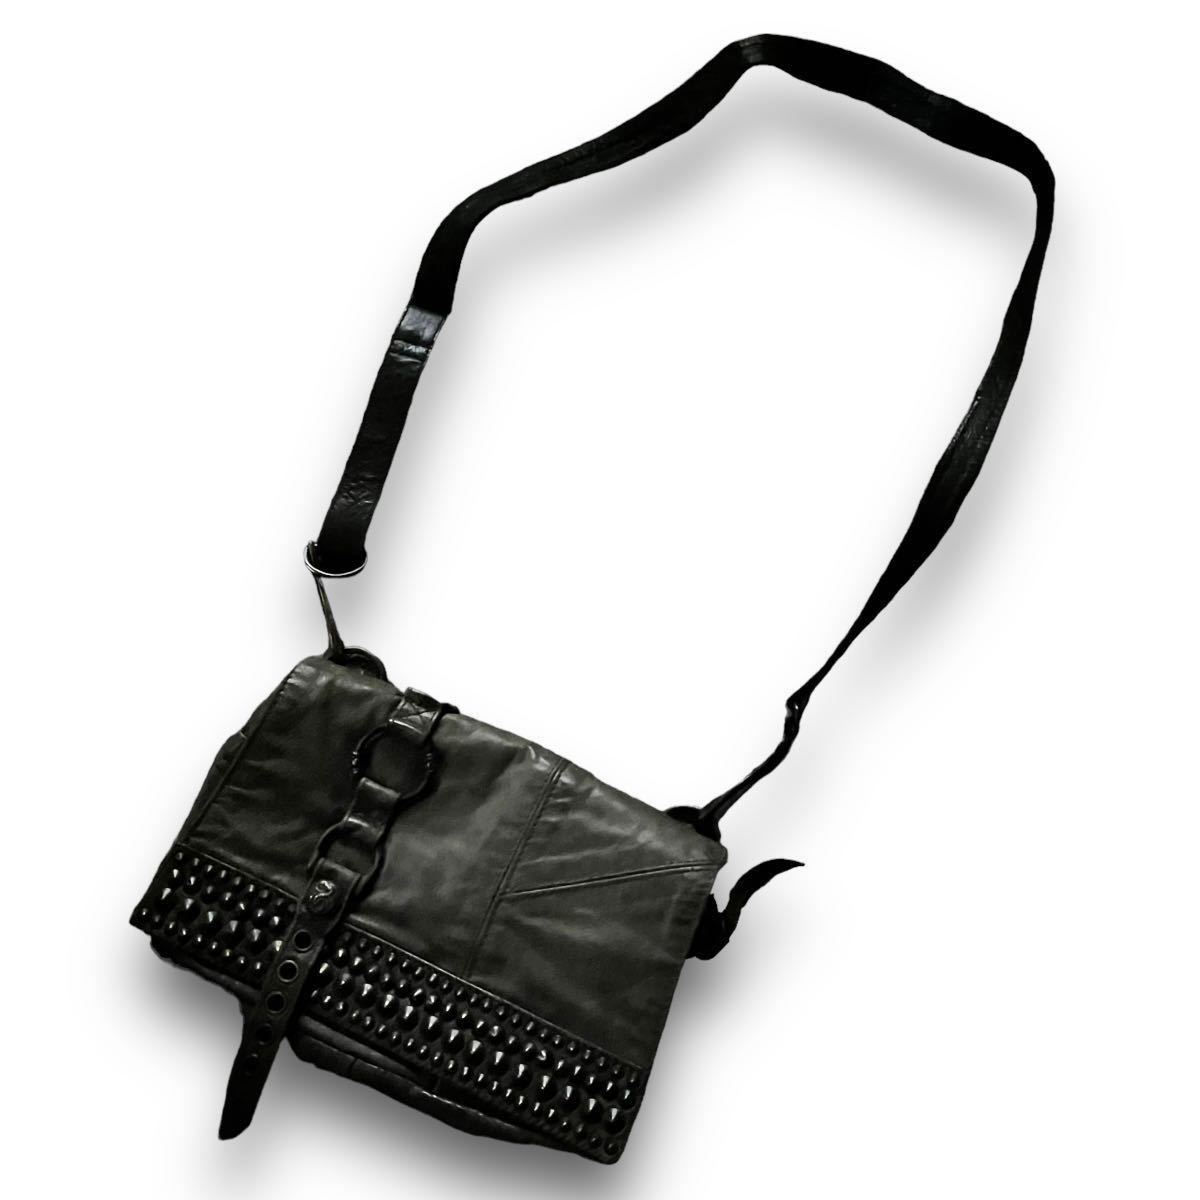 00's KMRii Archive Leather Shoulder Bag アーカイブ ケムリ バッグ ifsixwasnine lgb ...